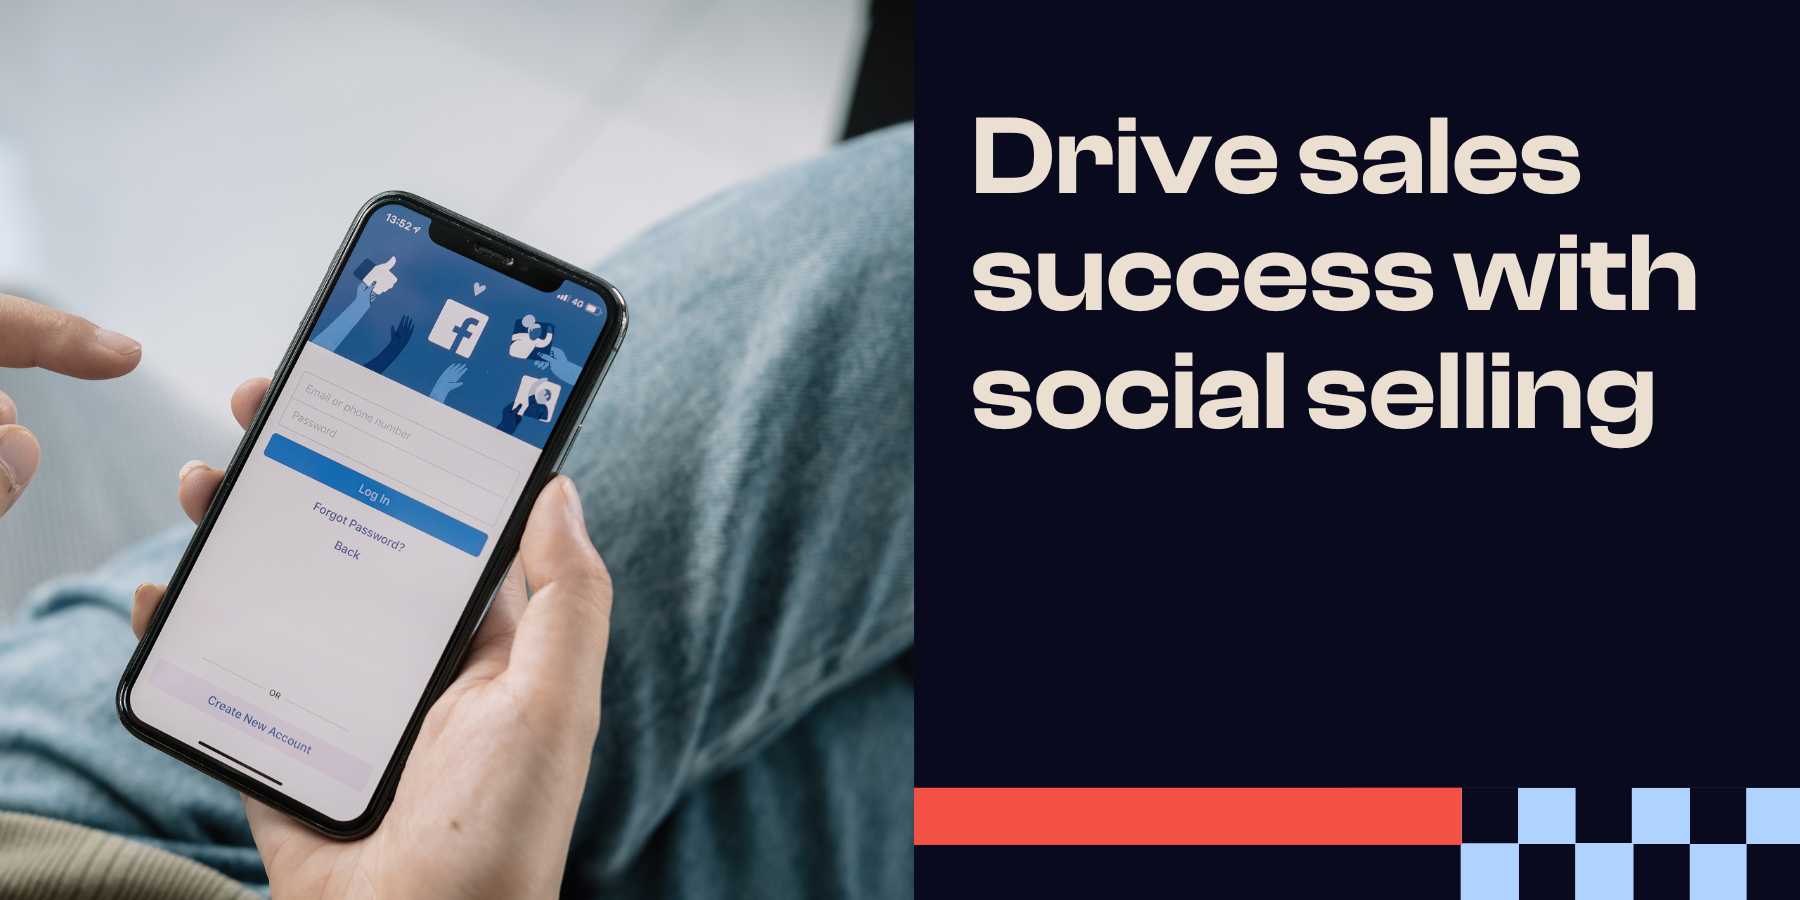 Drive sales success with social selling